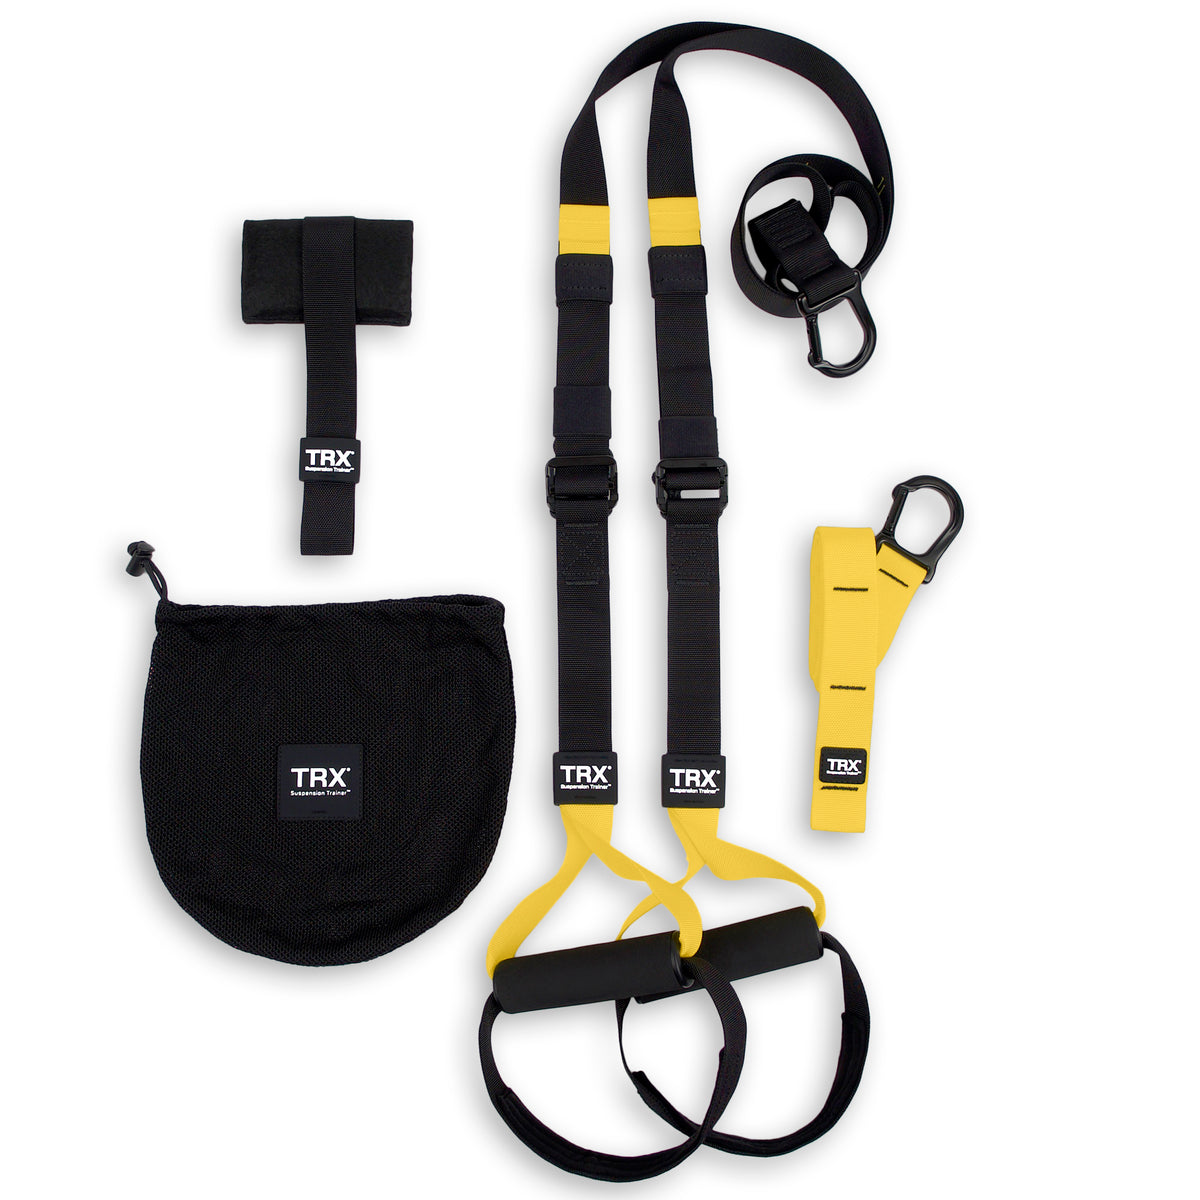 TRX® STRONG SYSTEM - Commercial Partners